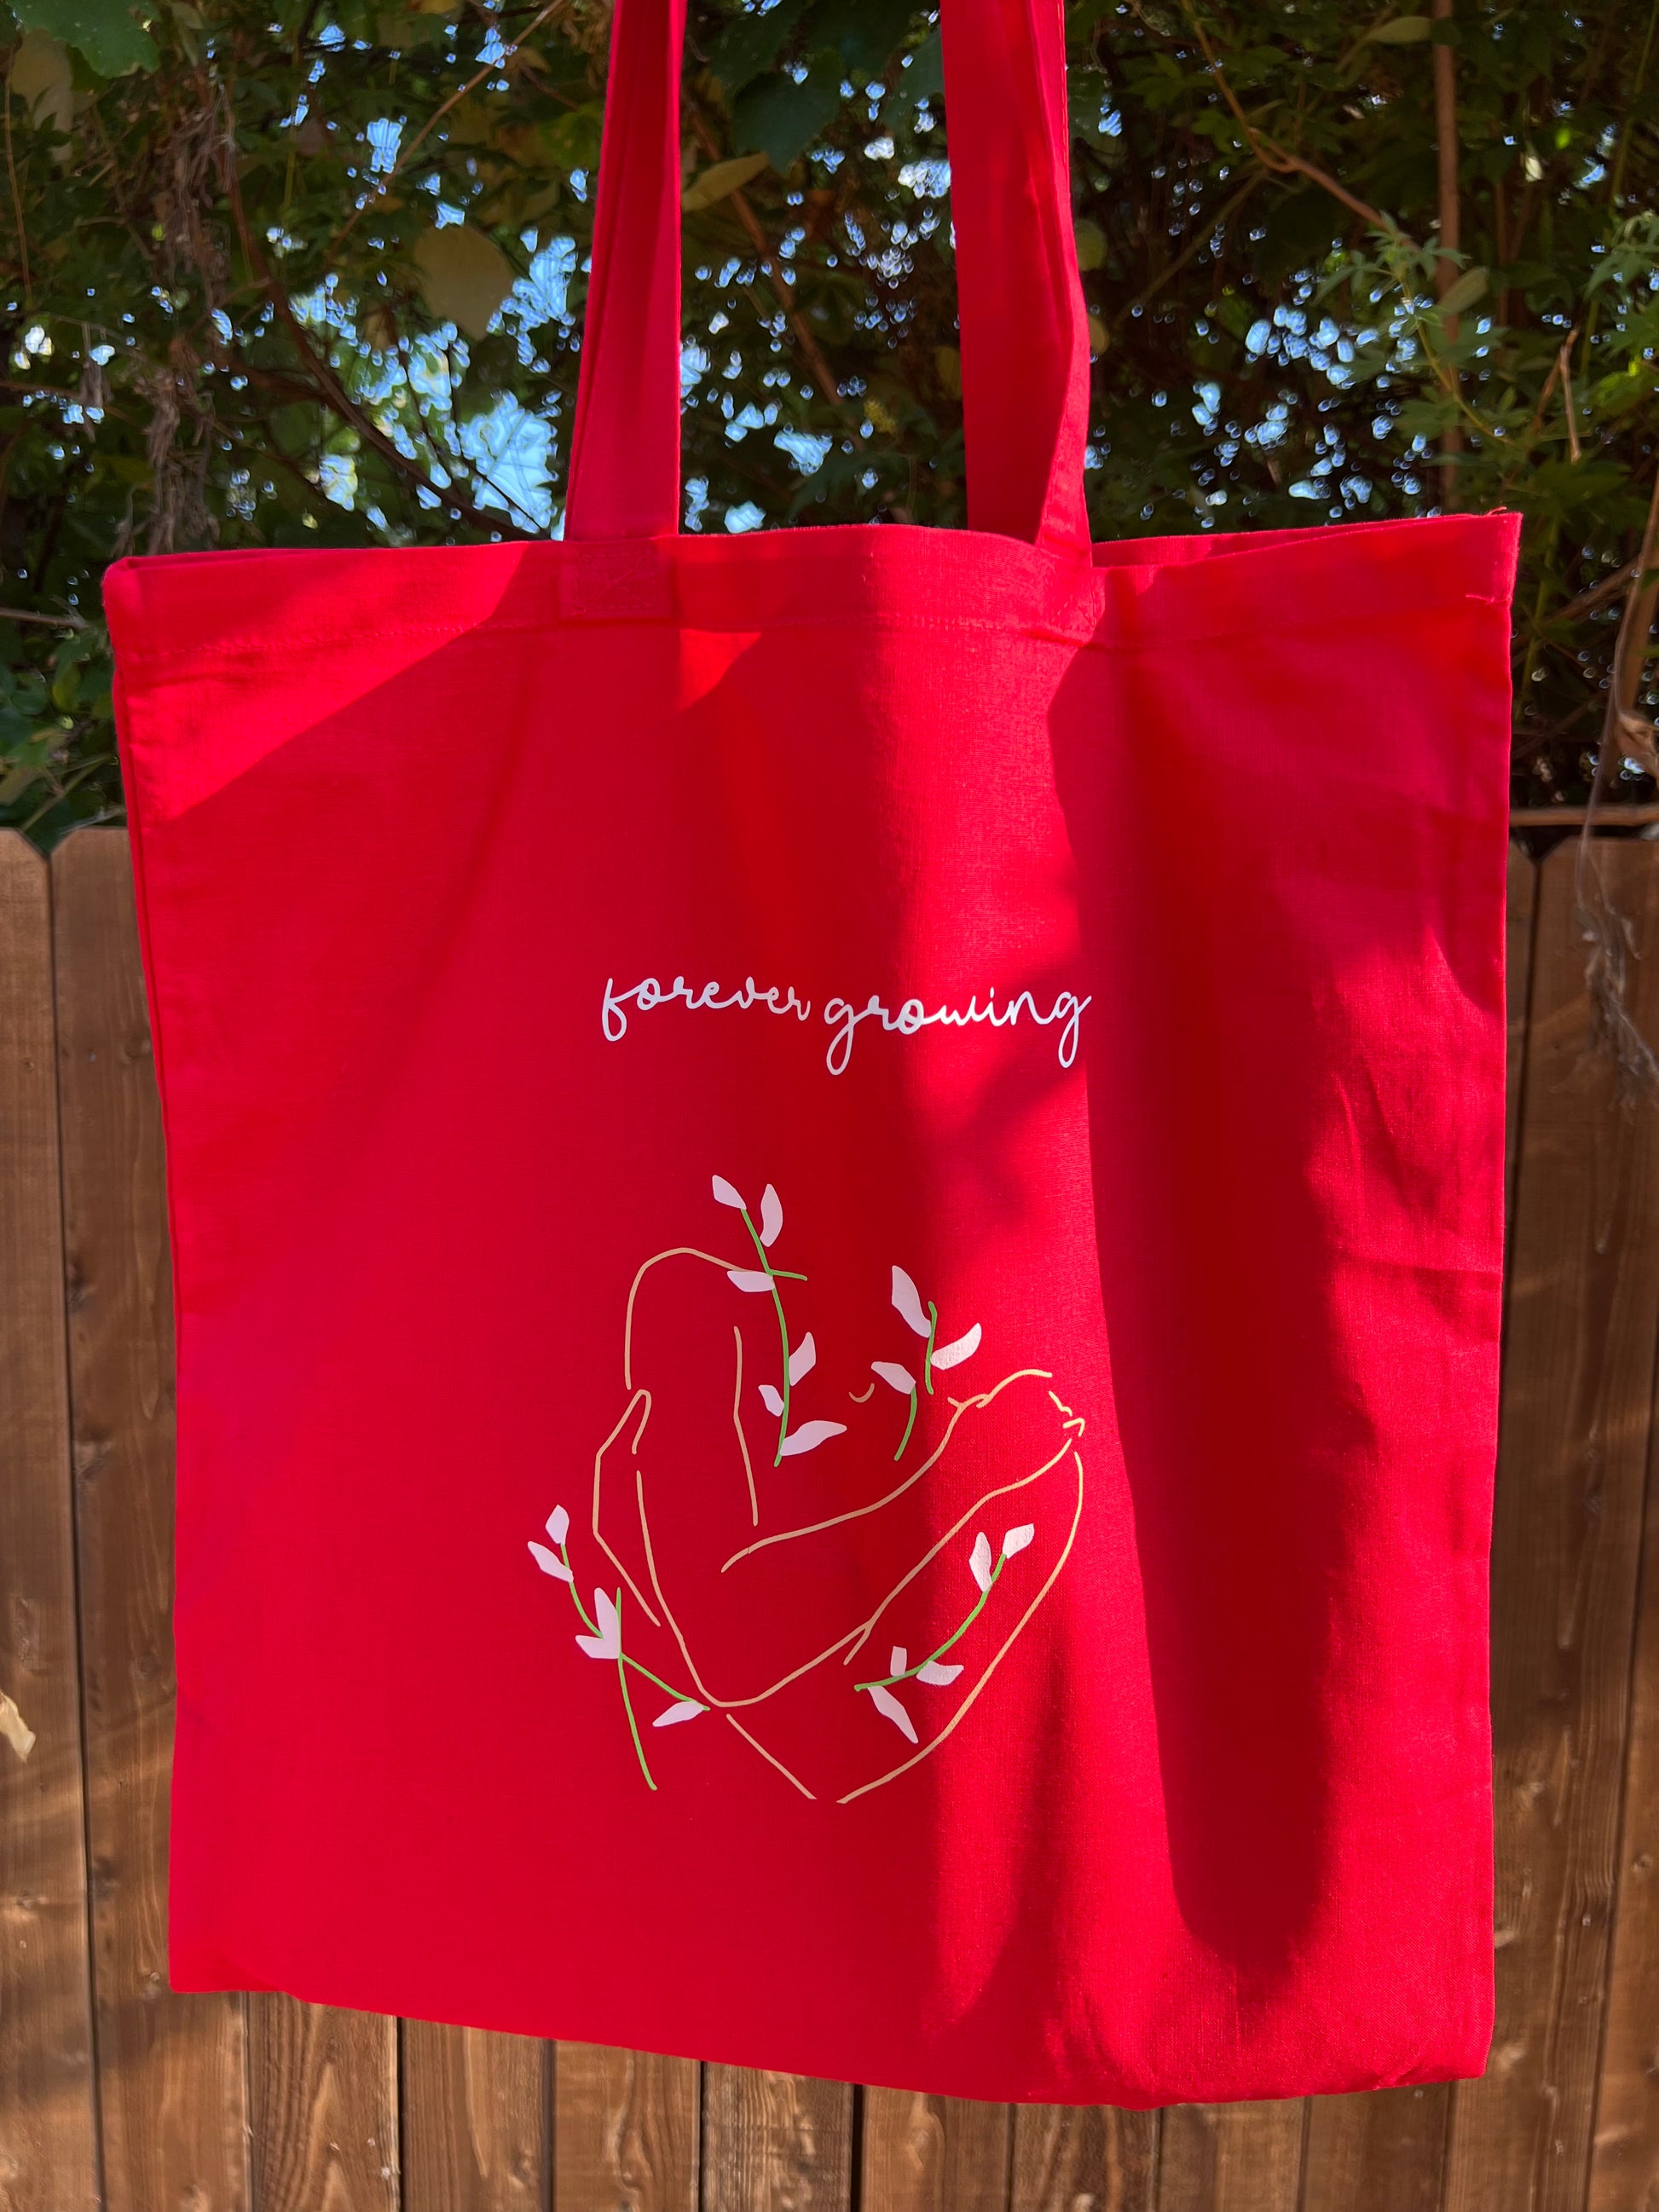 red tote bag with white text and designs in front of brown fence 